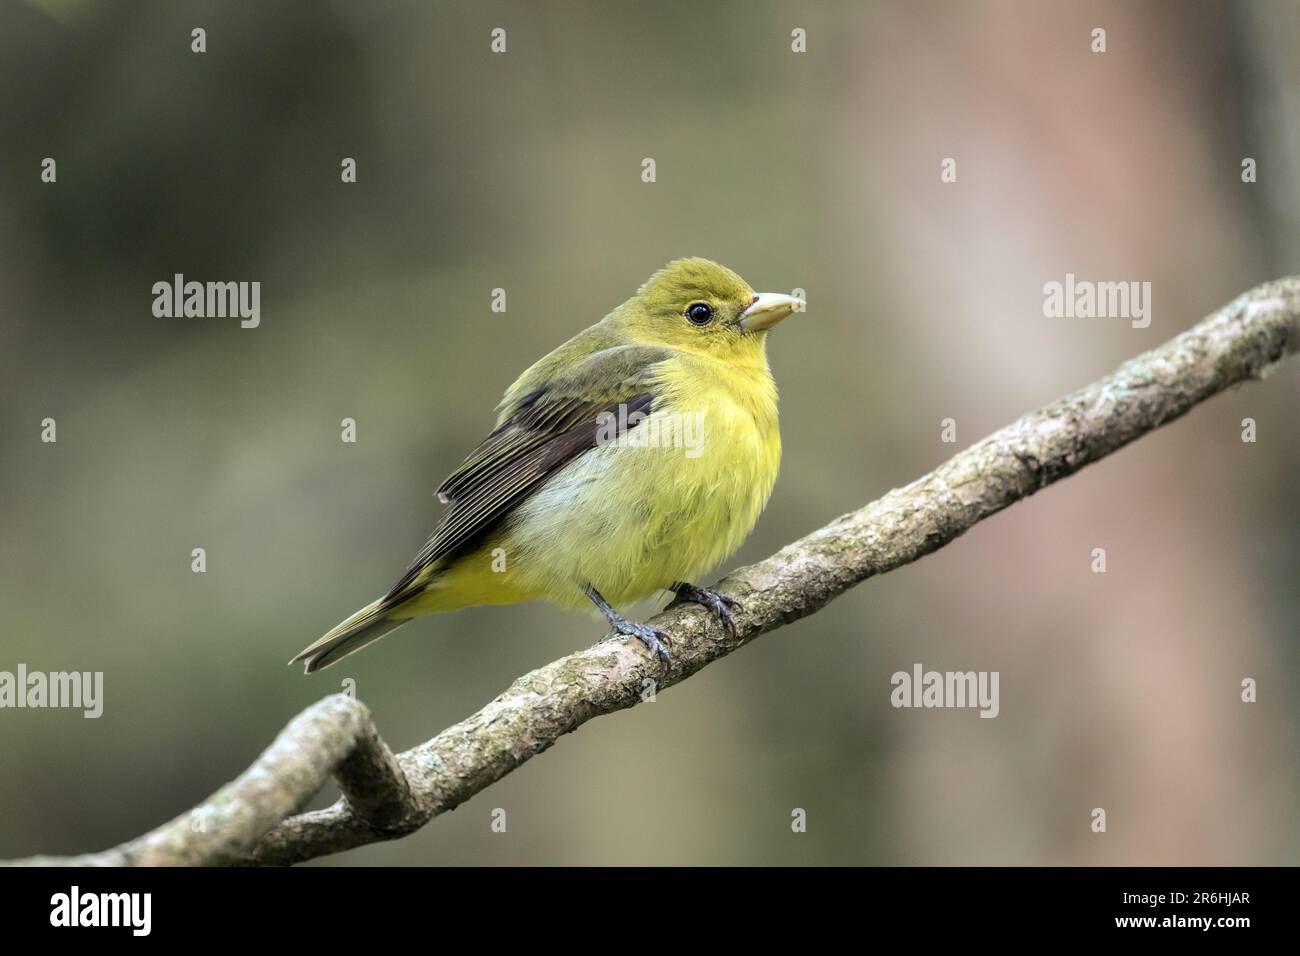 Closeup of a female Scarlet Tanager perching on a branch during spring migration, Ontario, Canada Stock Photo